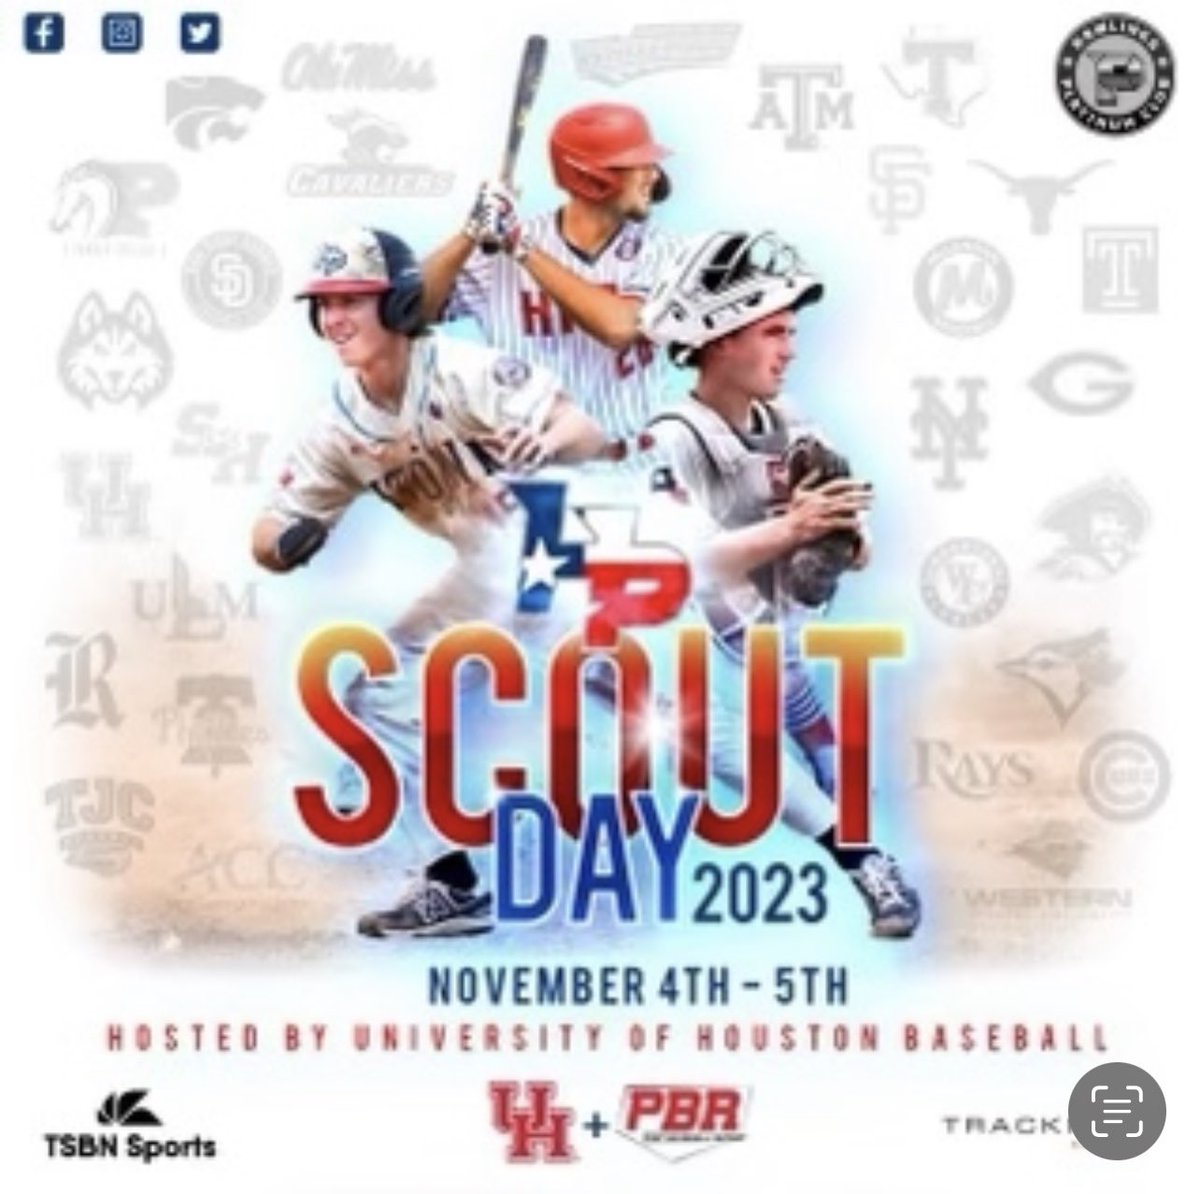 🚨 ⚾️ Scout Day ⚾️ 🚨 THIS WEEKEND!!! 🗓️: Saturday & Sunday (11/4-5) ⏰: 8:00am - 3:30pm 📍: @UHCougarBB 🧑‍🎓: ‘24, ‘25, ‘26, ‘27 📊: @PBR_Texas 📺: @TSBNSports